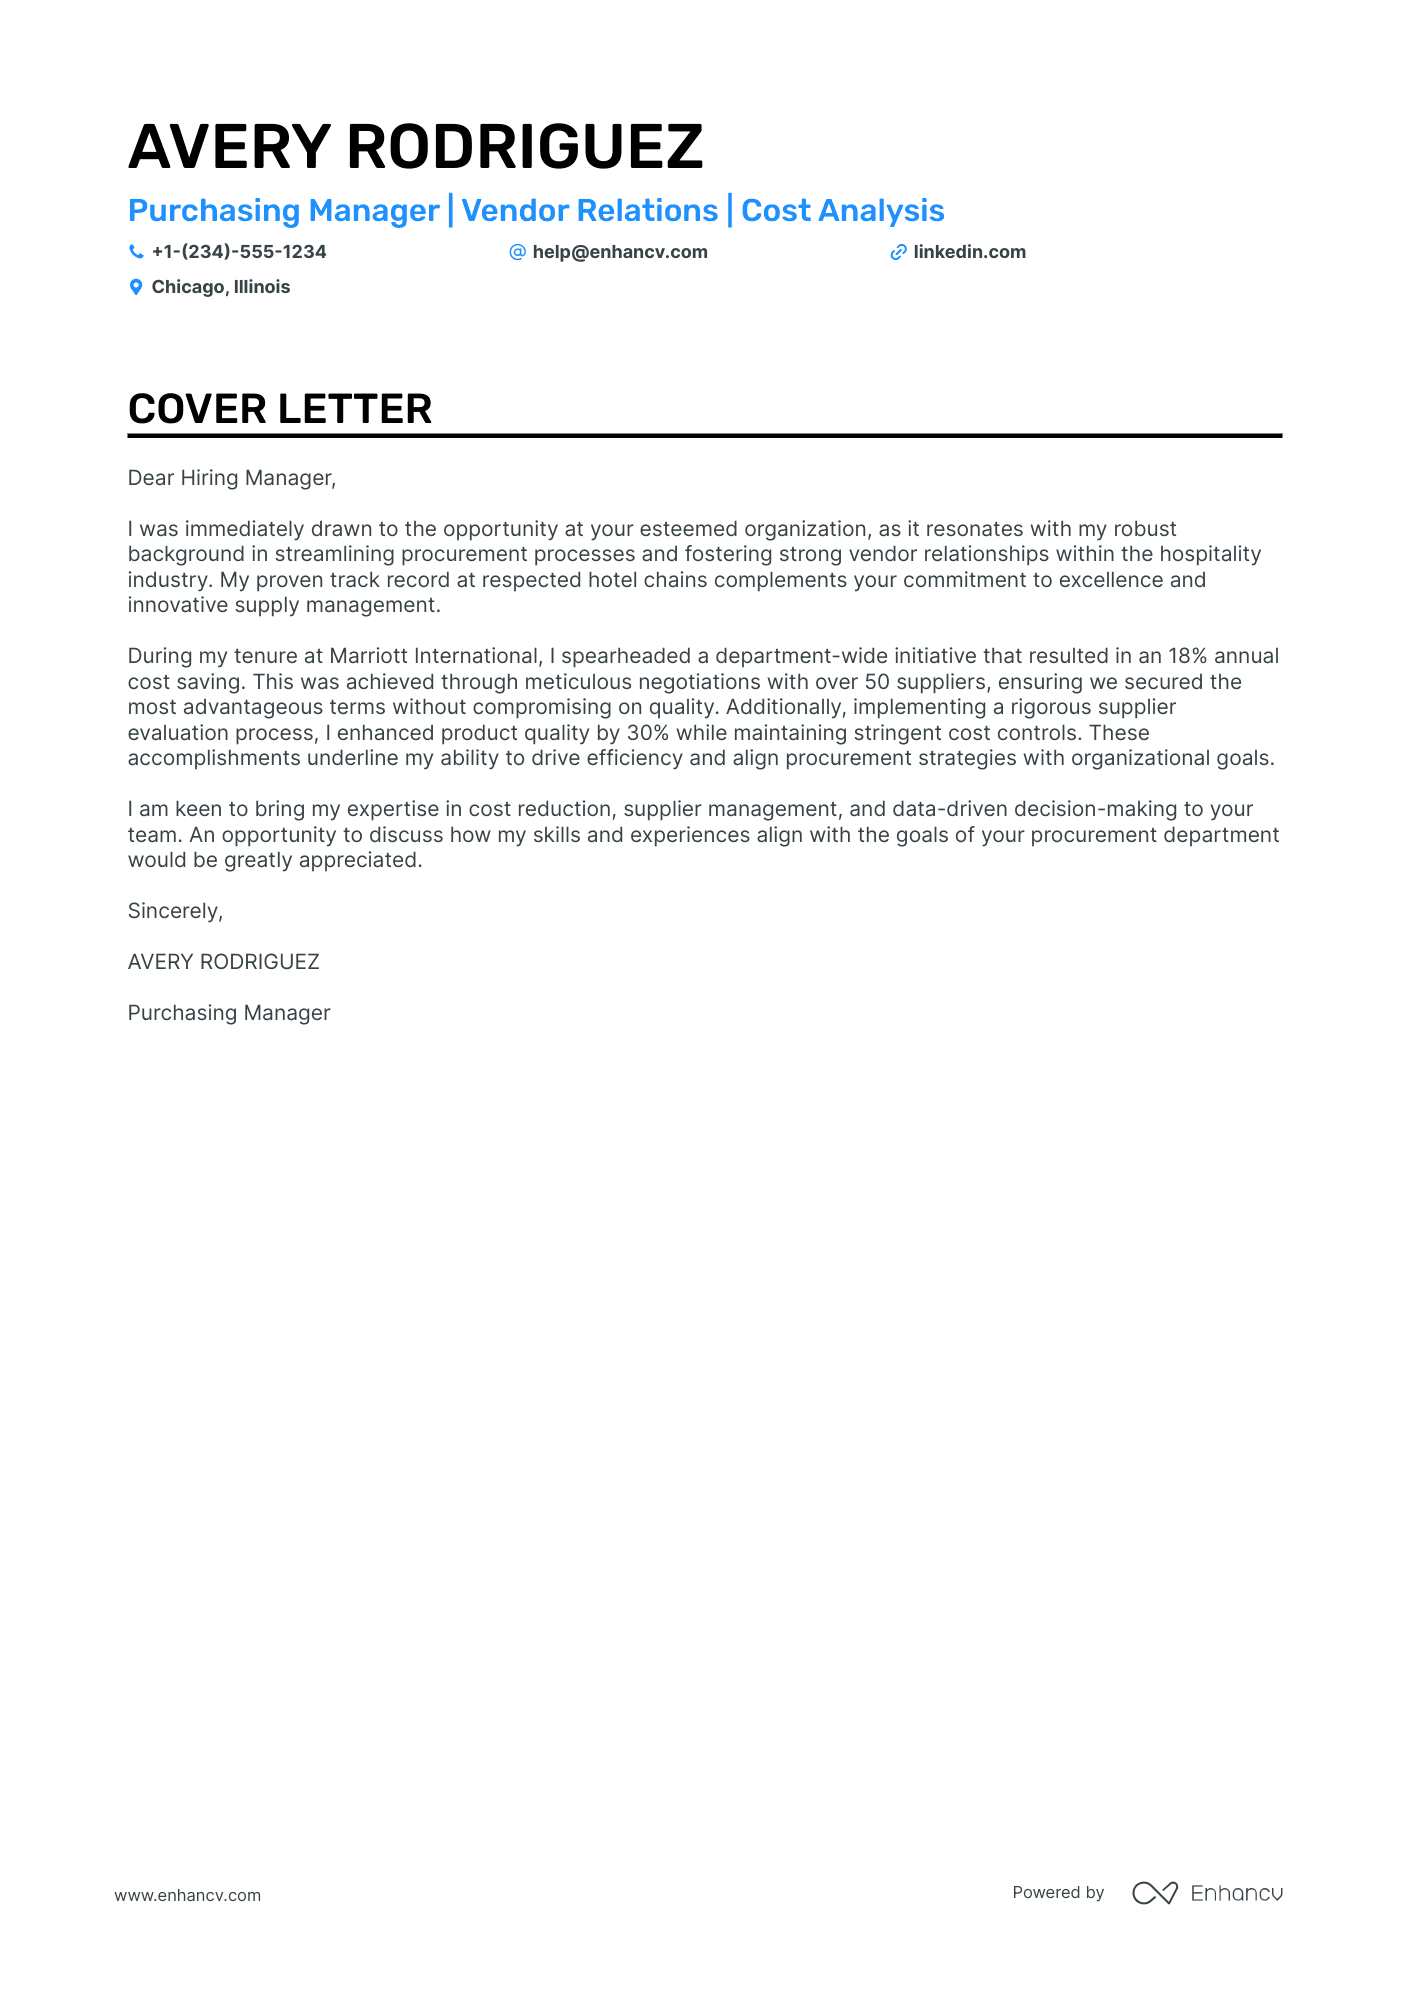 Purchase Manager cover letter